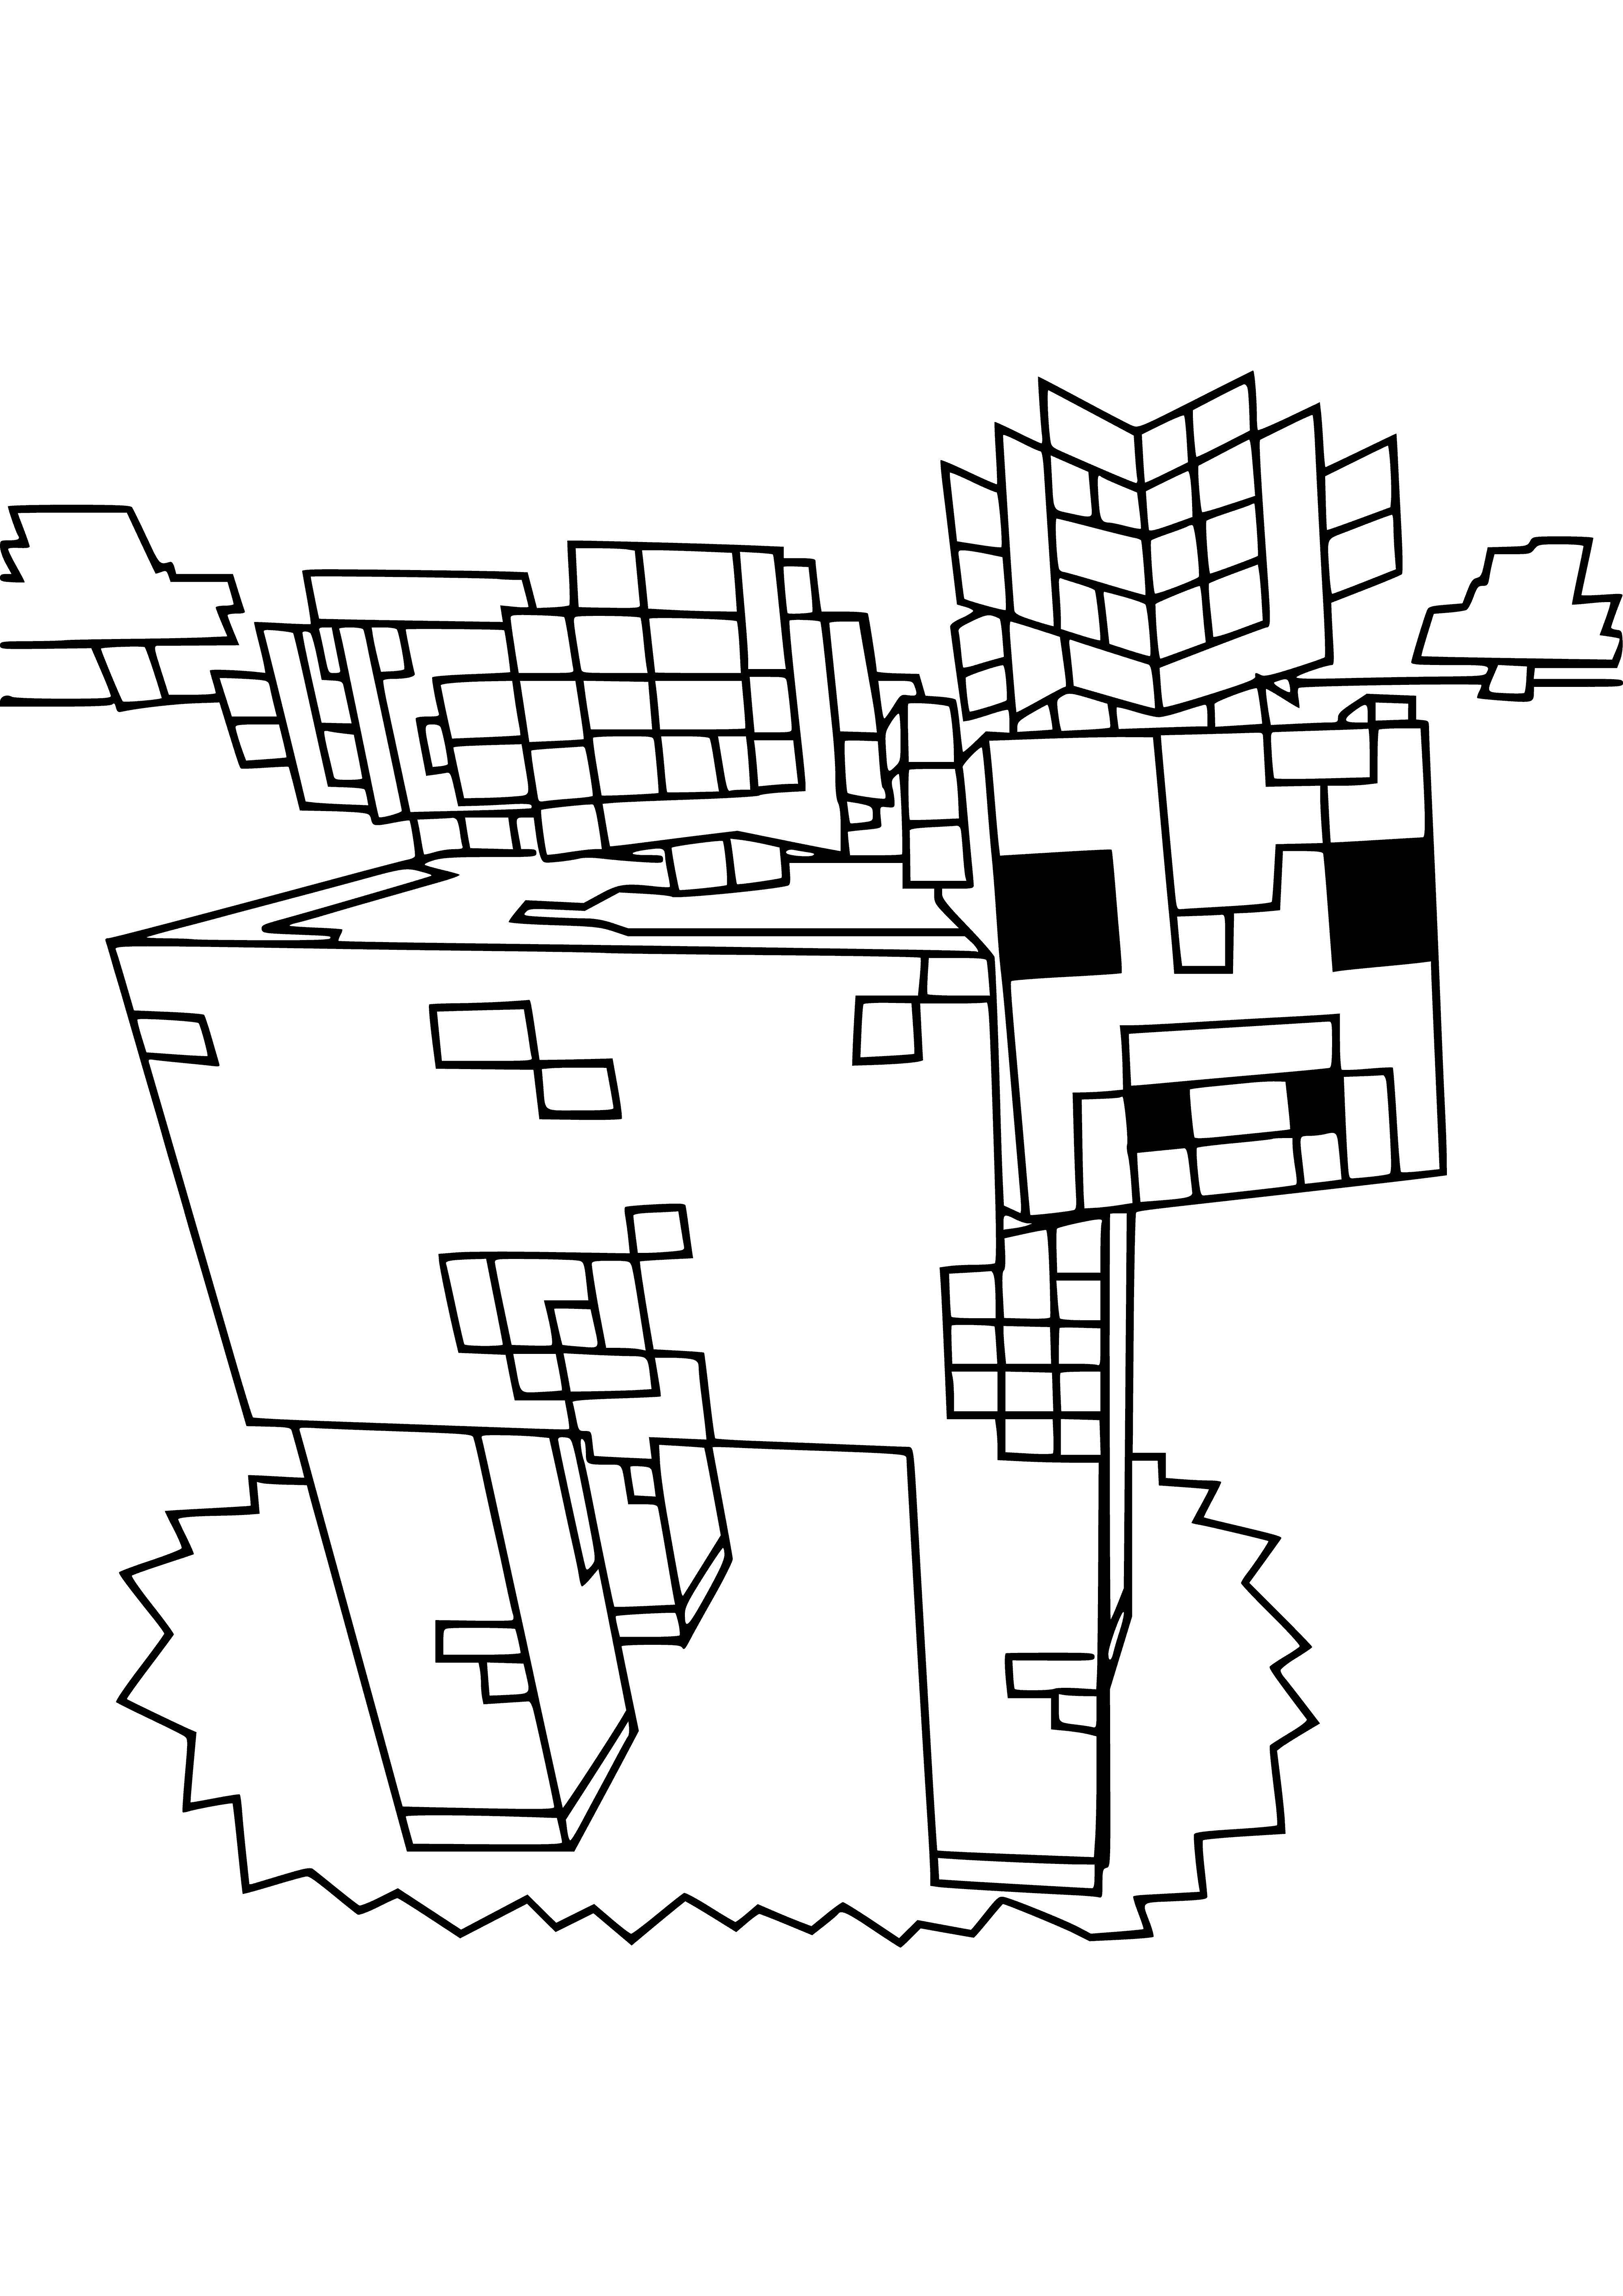 Mushroom cow coloring page